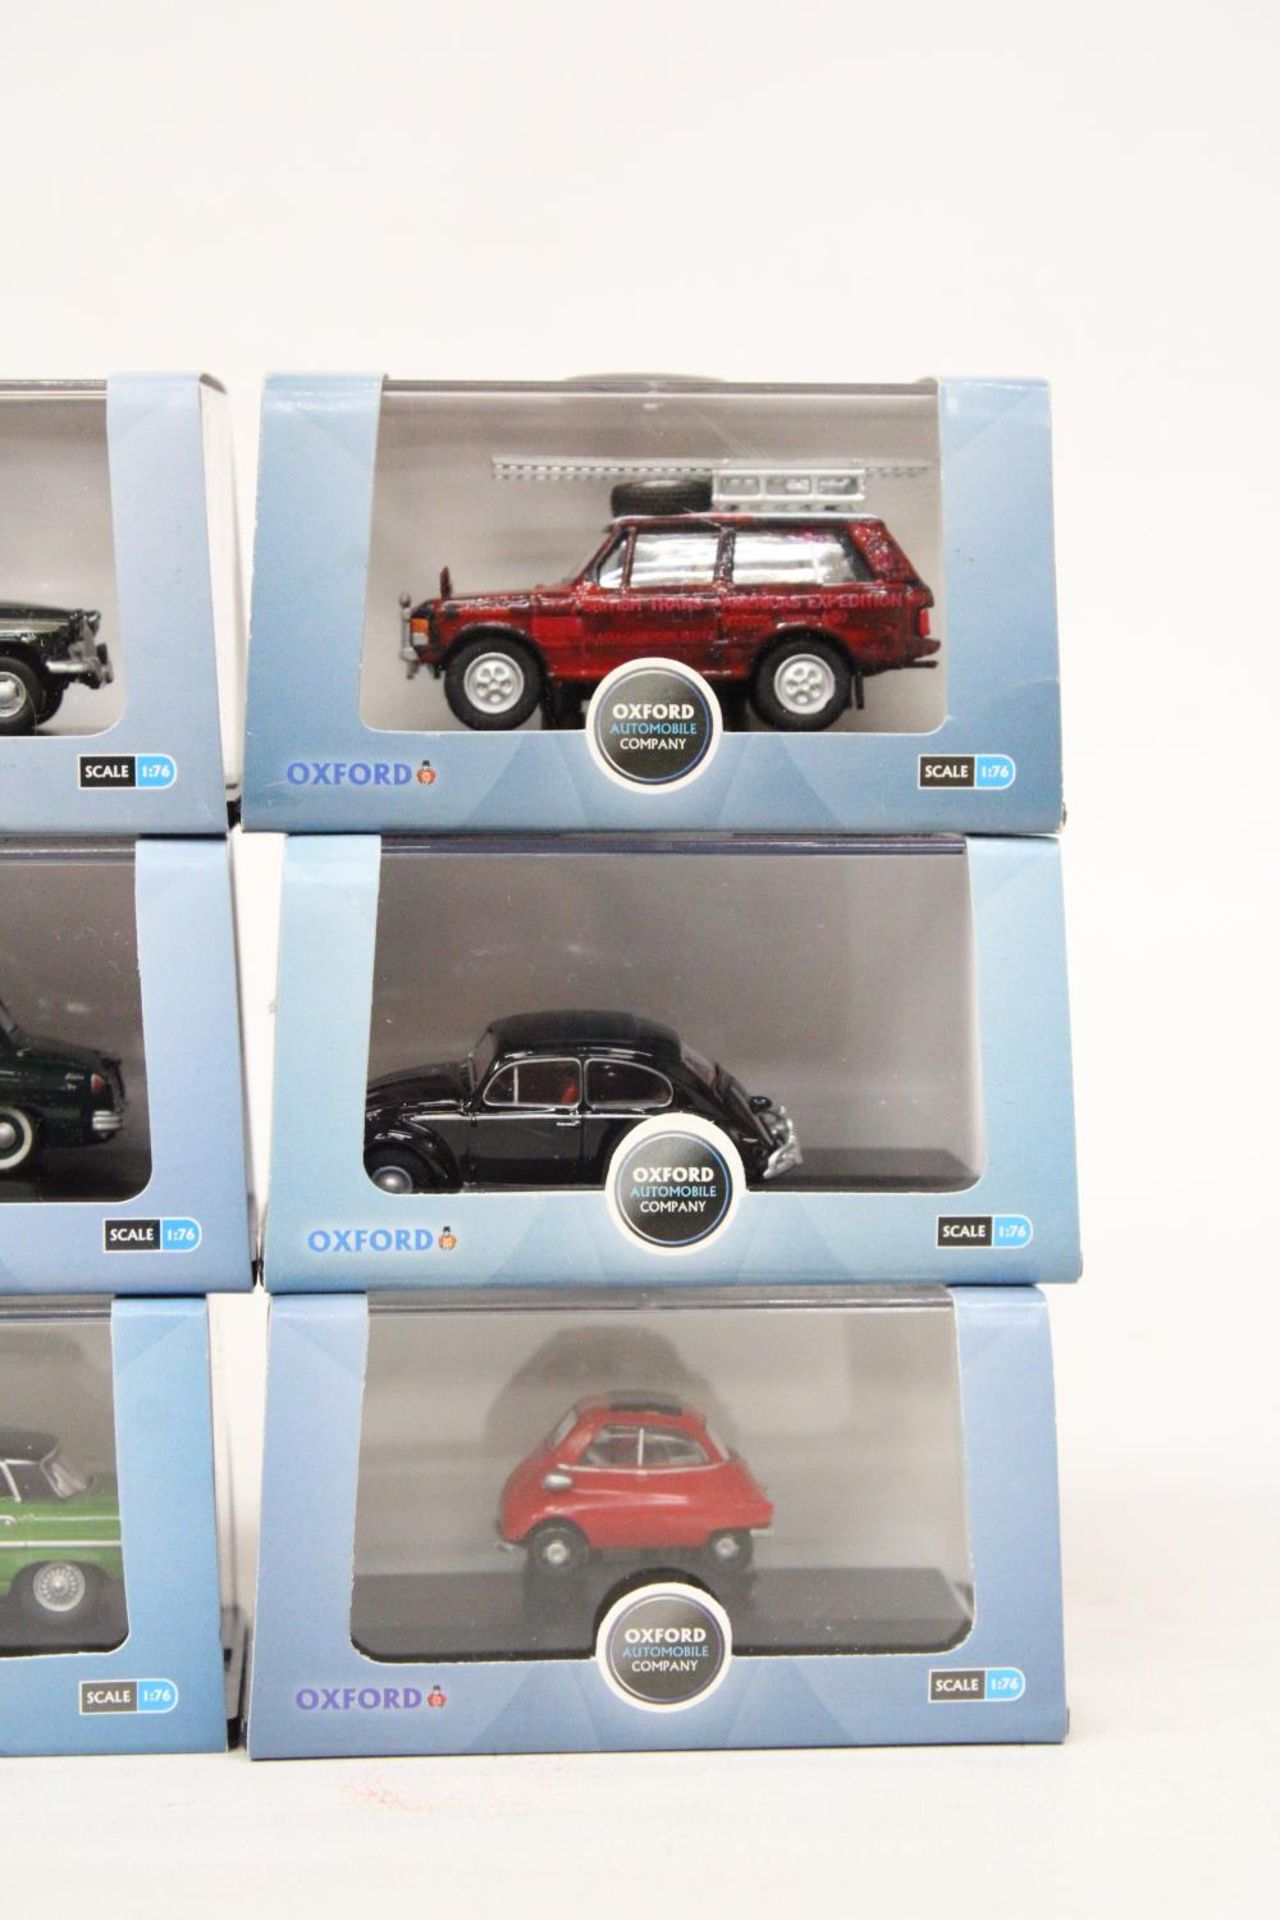 SIX VARIOUS AS NEW AND BOXED OXFORD AUTOMOBILE COMPANY VEHICLES - Image 3 of 8